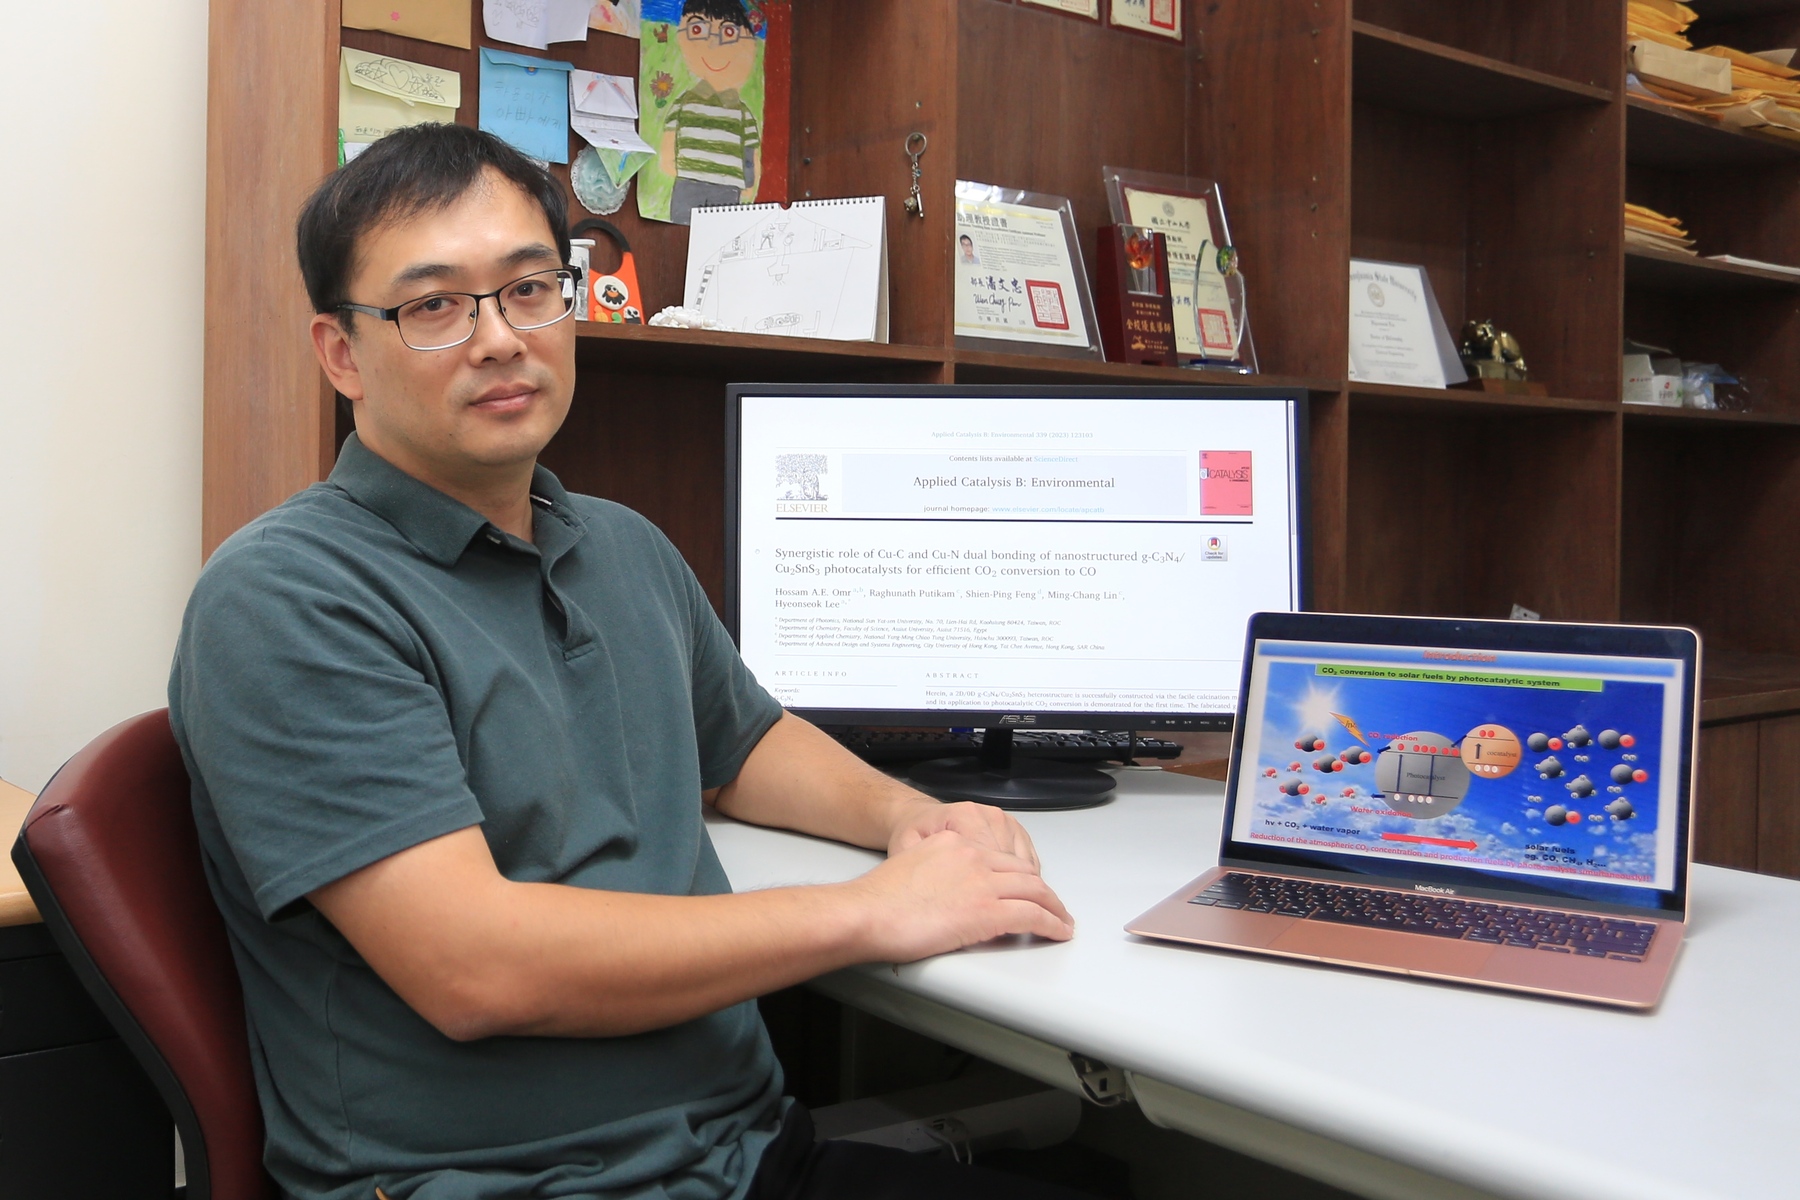 The latest research of Assistant Professor Hyeonseok Lee of the Department of Photonics of NSYSU found the synergistic role of Cu-C and Cu-N dual bonding from functionally nanostructured graphitic carbon nitride (g-C3N4)/ ternary metal sulfide (Cu2SnS3, CTS) photocatalysts for efficient CO2 conversion to CO.